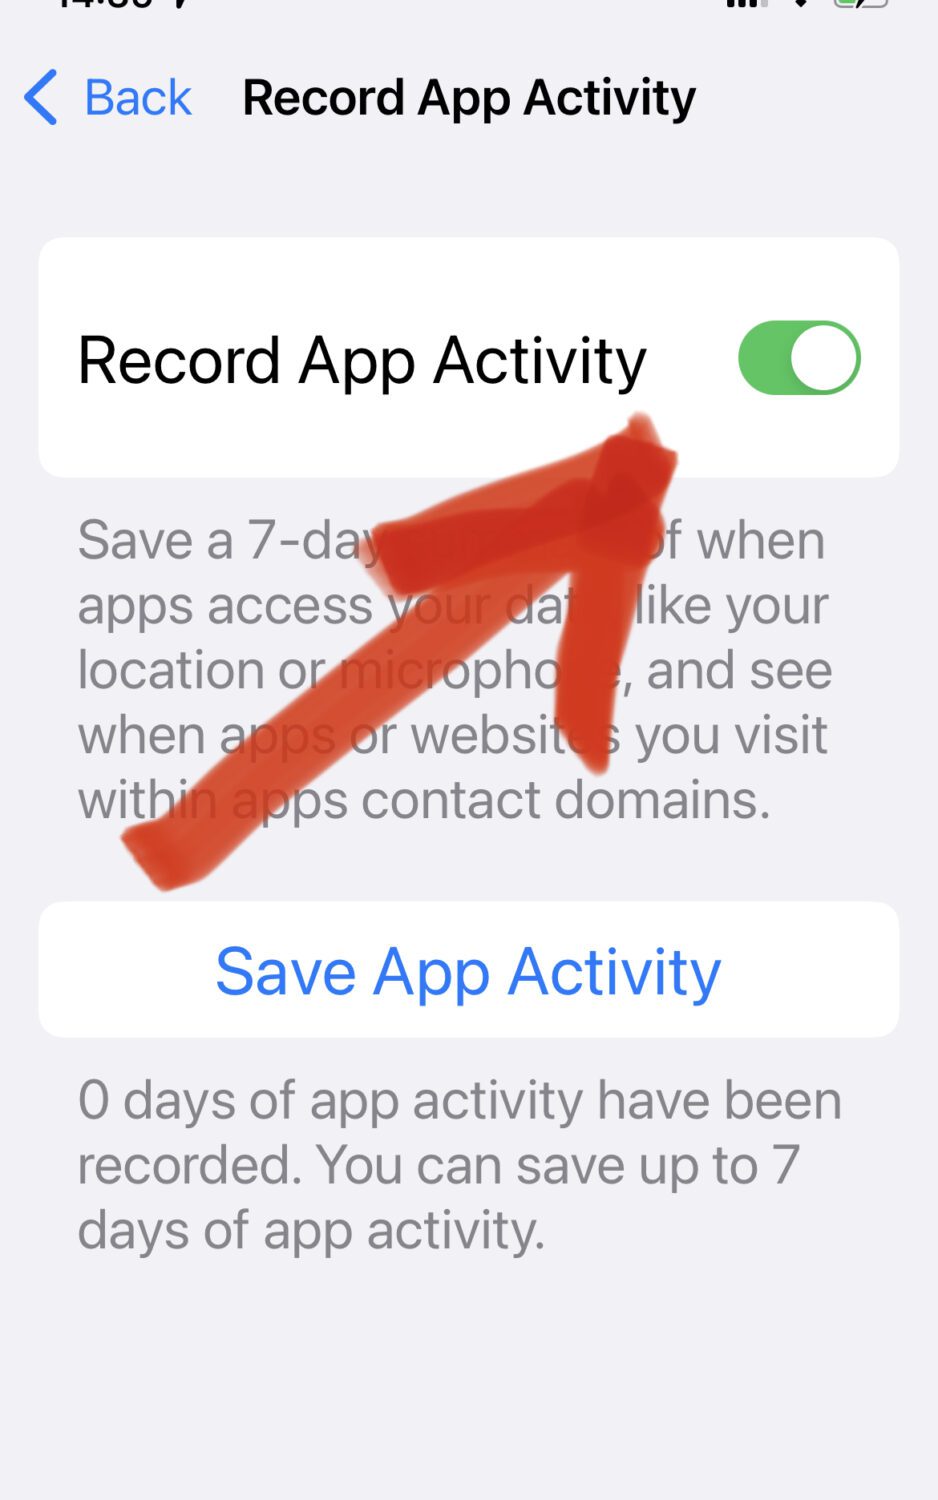 Turn on the most important privacy setting in the new iPhone software